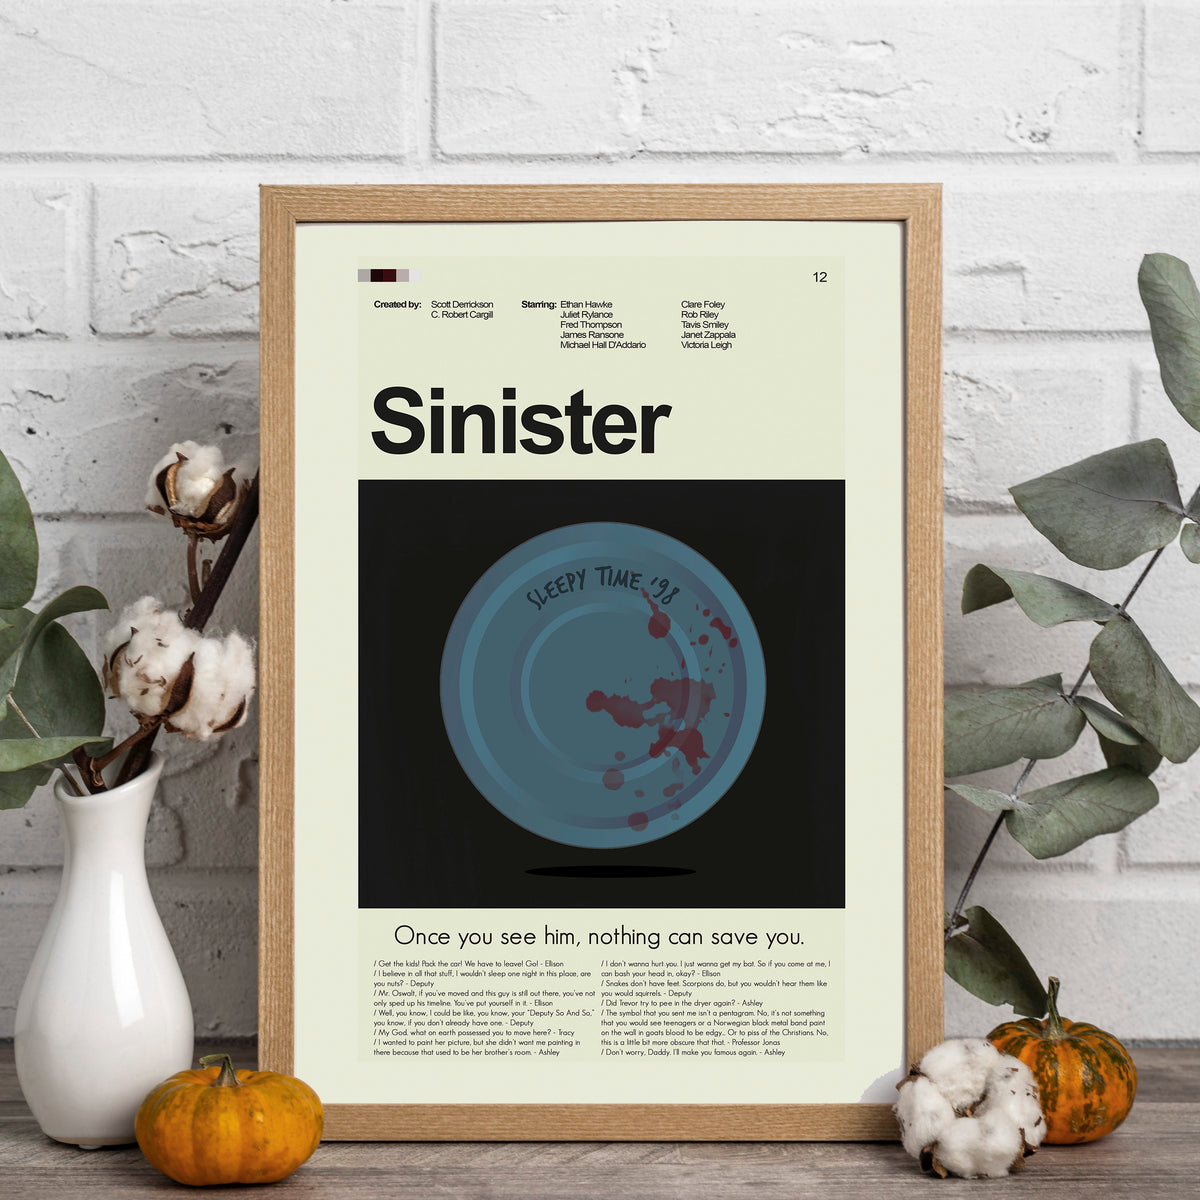 Sinister - 8mm Film Canister | 12"x18" or 18"x24" Print only